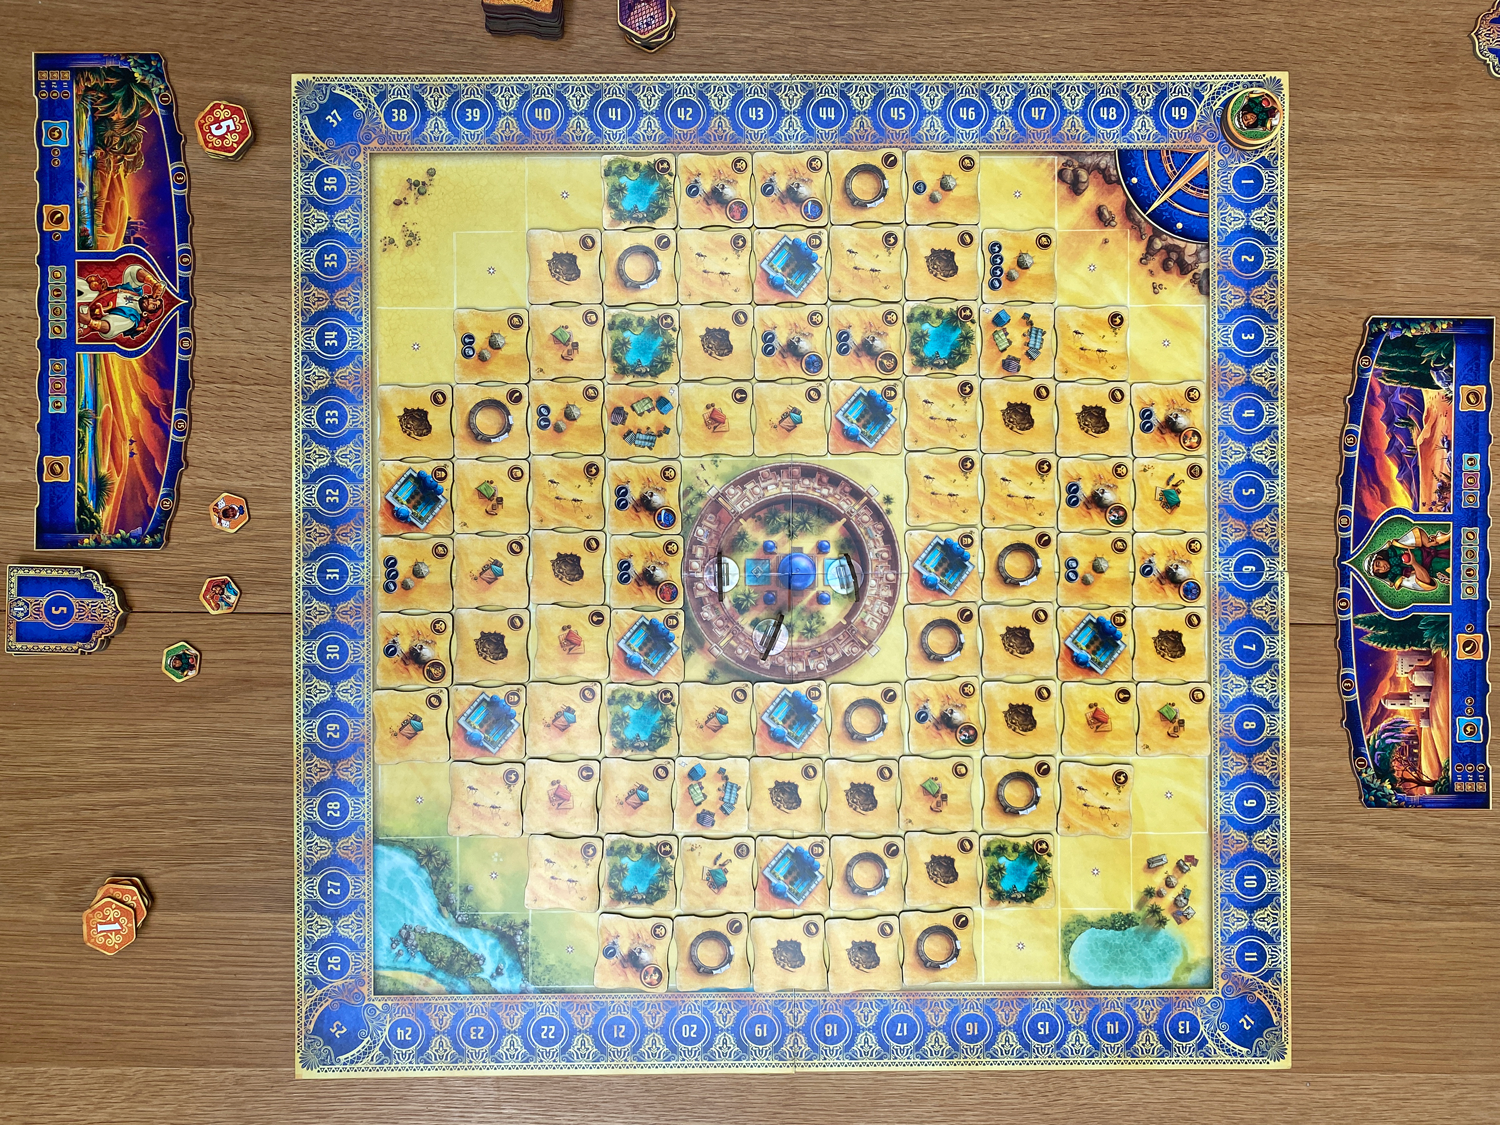 Tiles of the Arabian Nights Board Game Image © Board Game Review UK